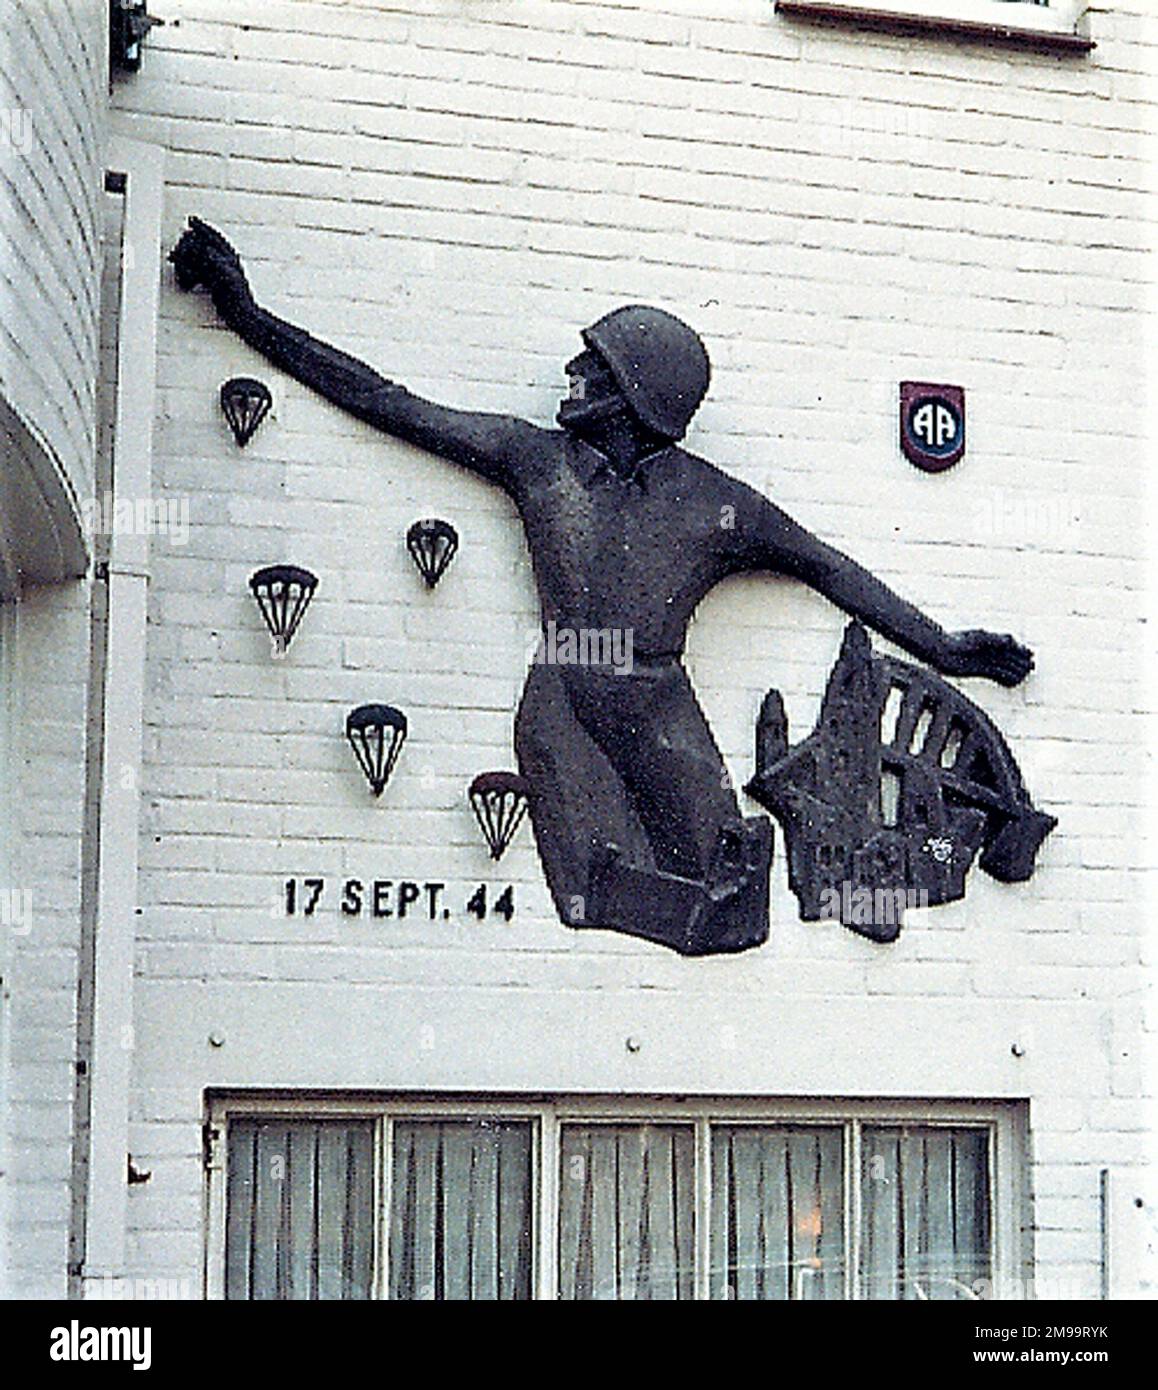 During Operation Market Garden in September 1944 this area was taken by the 508th Parachute Infantry Regiment of the US 82nd Airborne Division. The figure on the wall is a Memorial to that Division. The hotel had been used for almost four years by the Germans as an HQ and then as a parachute training school. They also used the Klooster Nebo, the large Catholic Seminary across the road, both of which were taken over by the advancing Allies' war correspondents and photographers who arrived by glider. Guards Armoured Division Officers moved into the hotel, to be followed by 82nd Airborne staff. Stock Photo